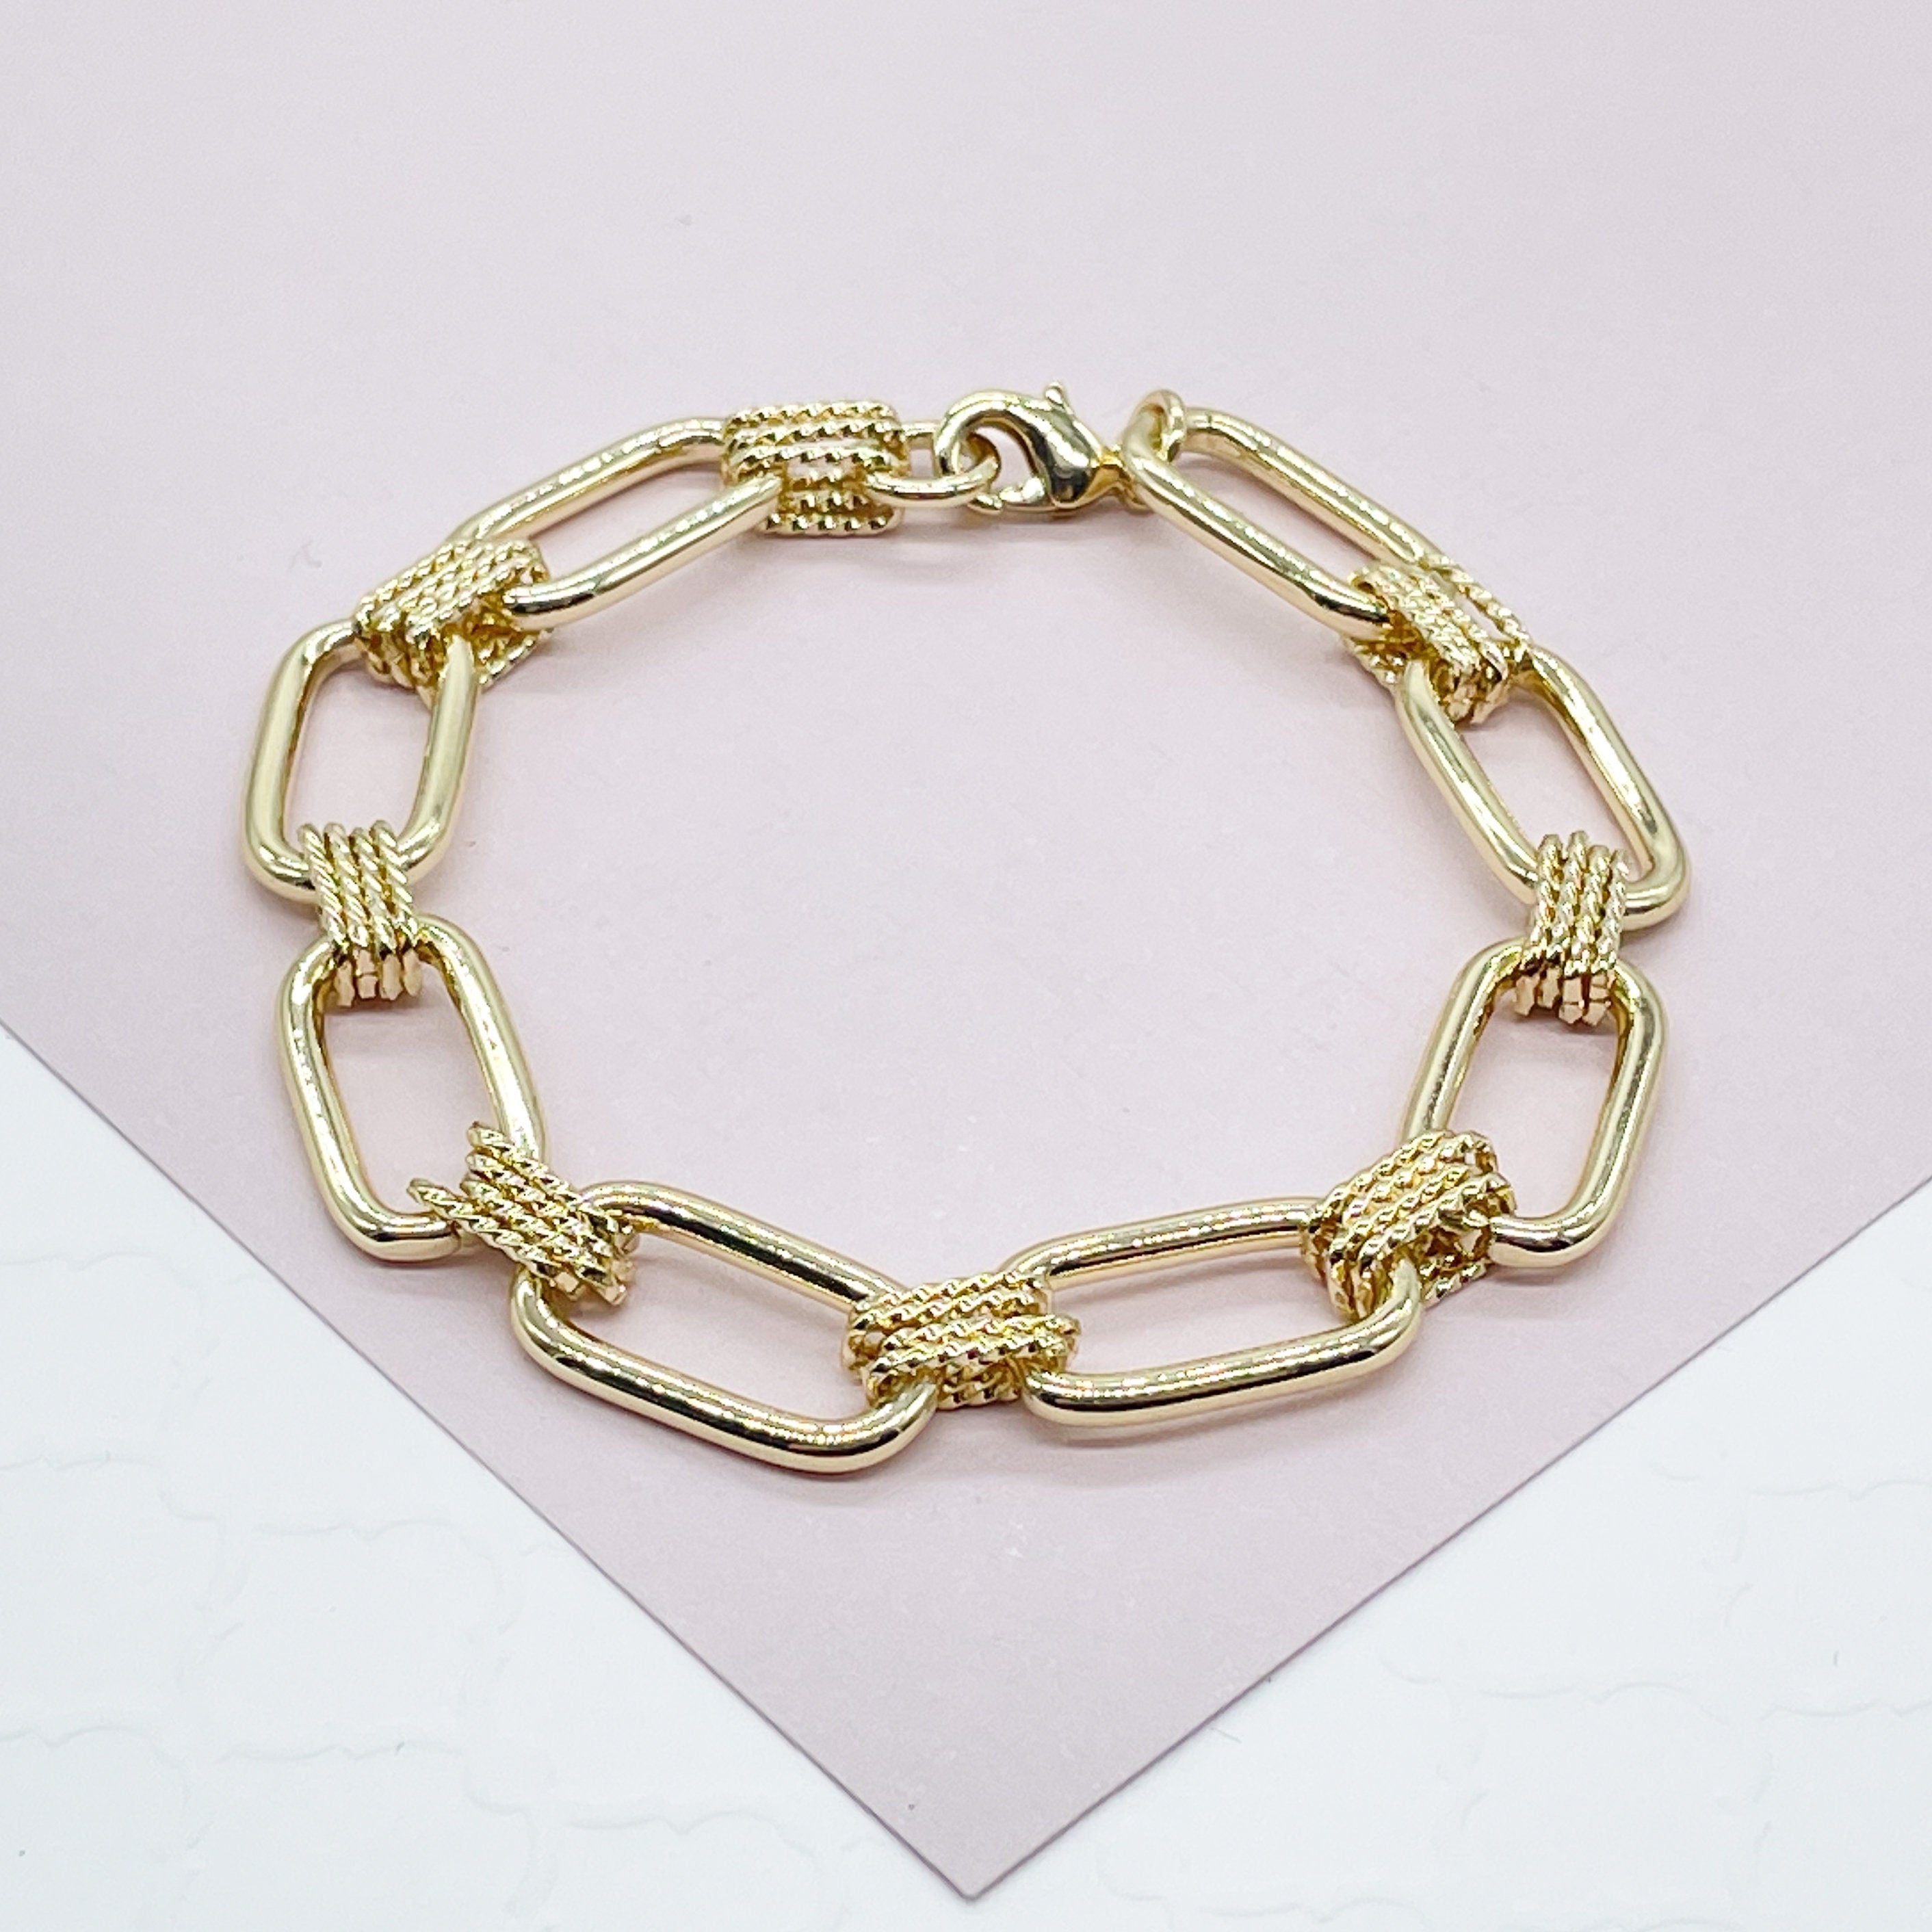 22K Gold Ladies Bracelet - brla27413 - US$ 1,164 - This beautiful 22K Gold  bracelet for Ladies is excellently handcrafted with filigree work in shine f